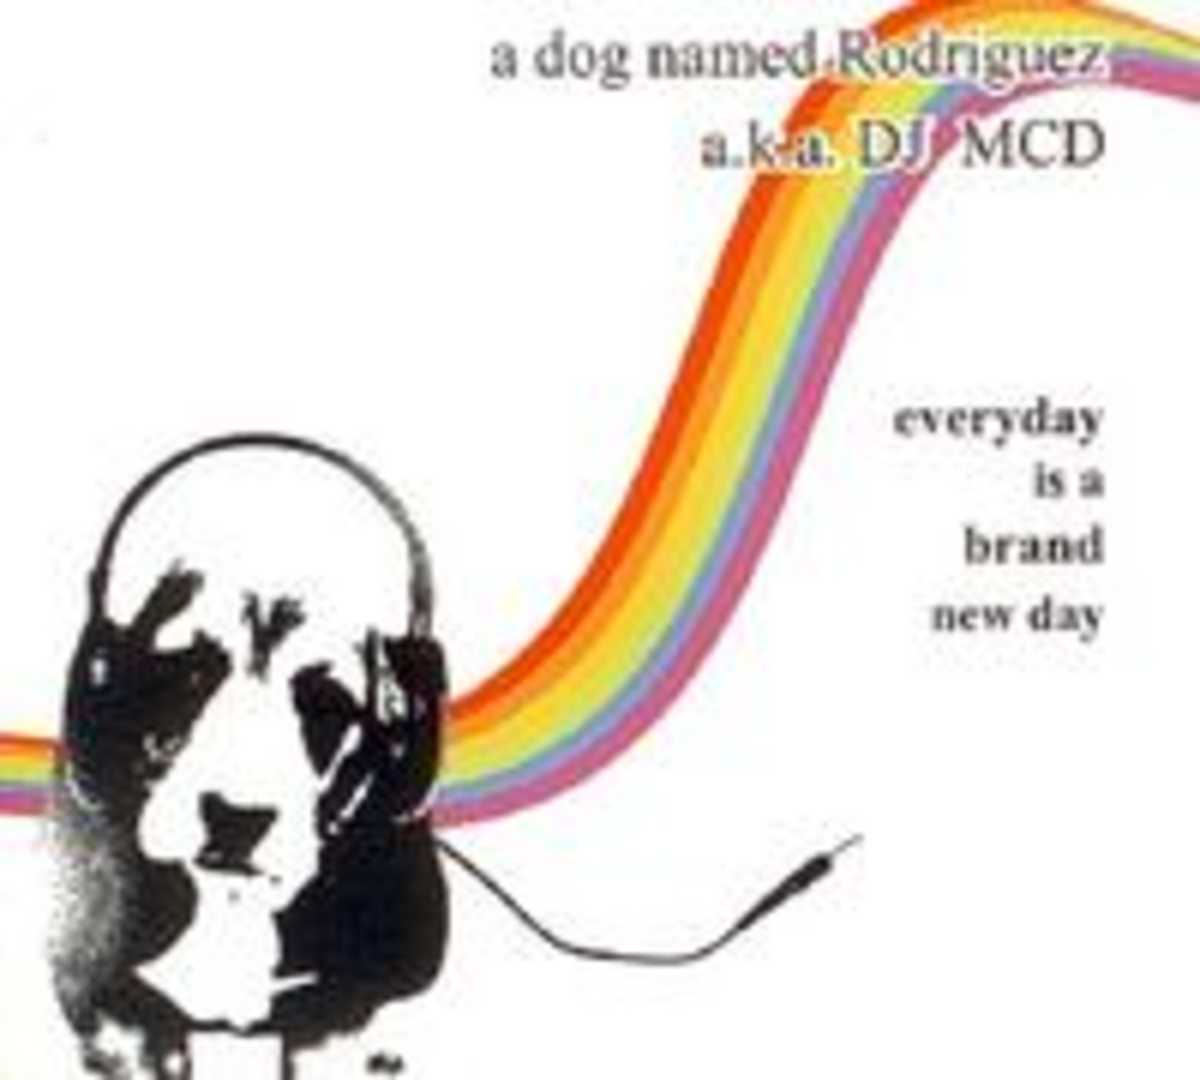 A Dog Named Rodriguez - Everyday is a brand new day